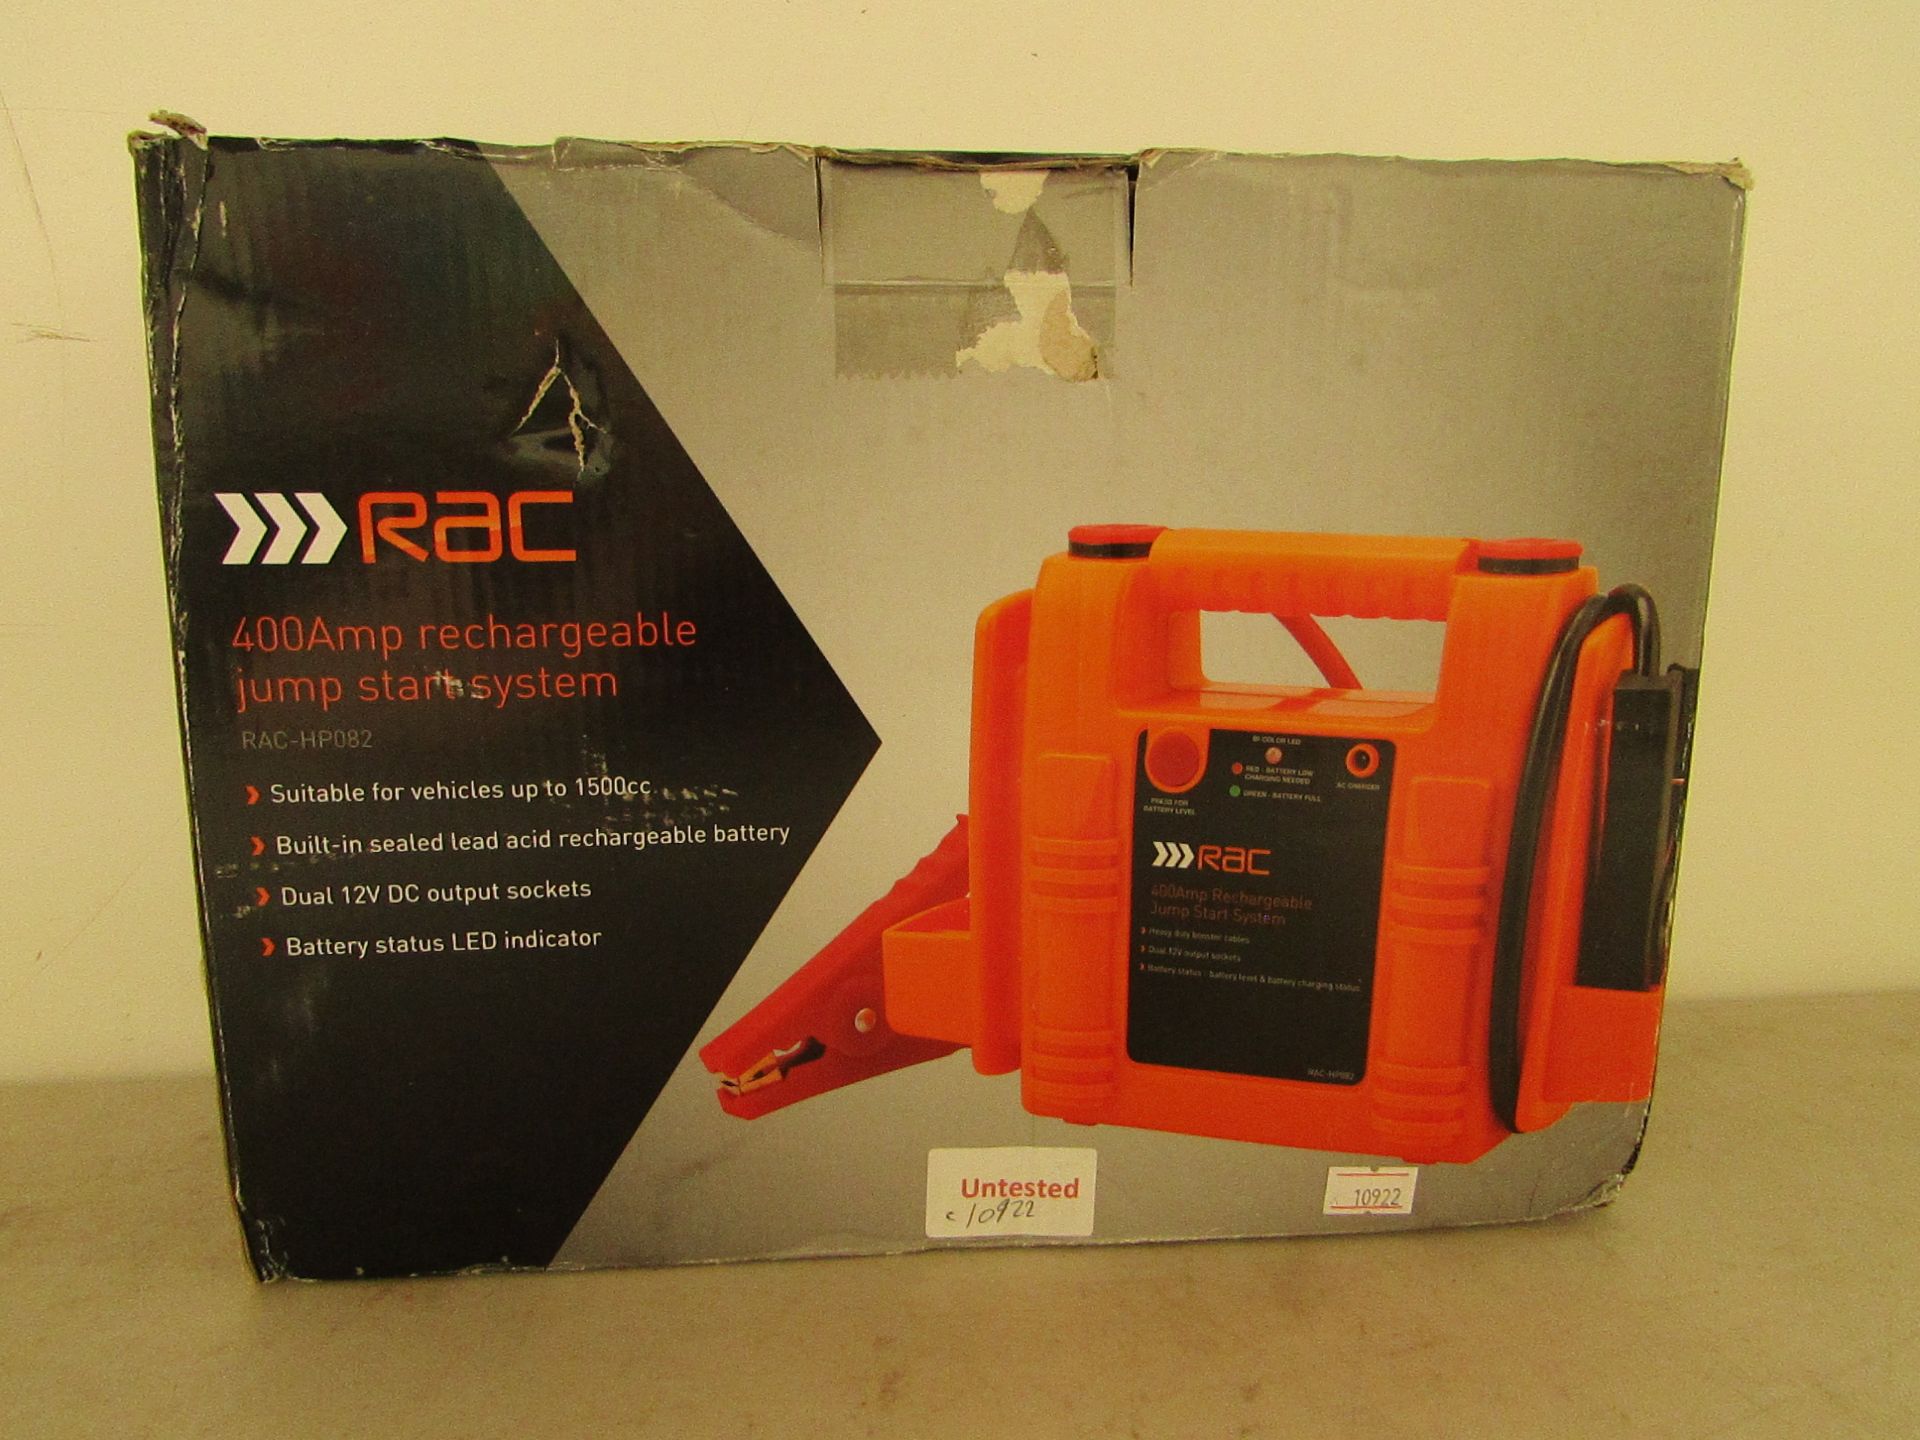 RAC 4000amp rechargeable jump start system, unchecked and boxed.